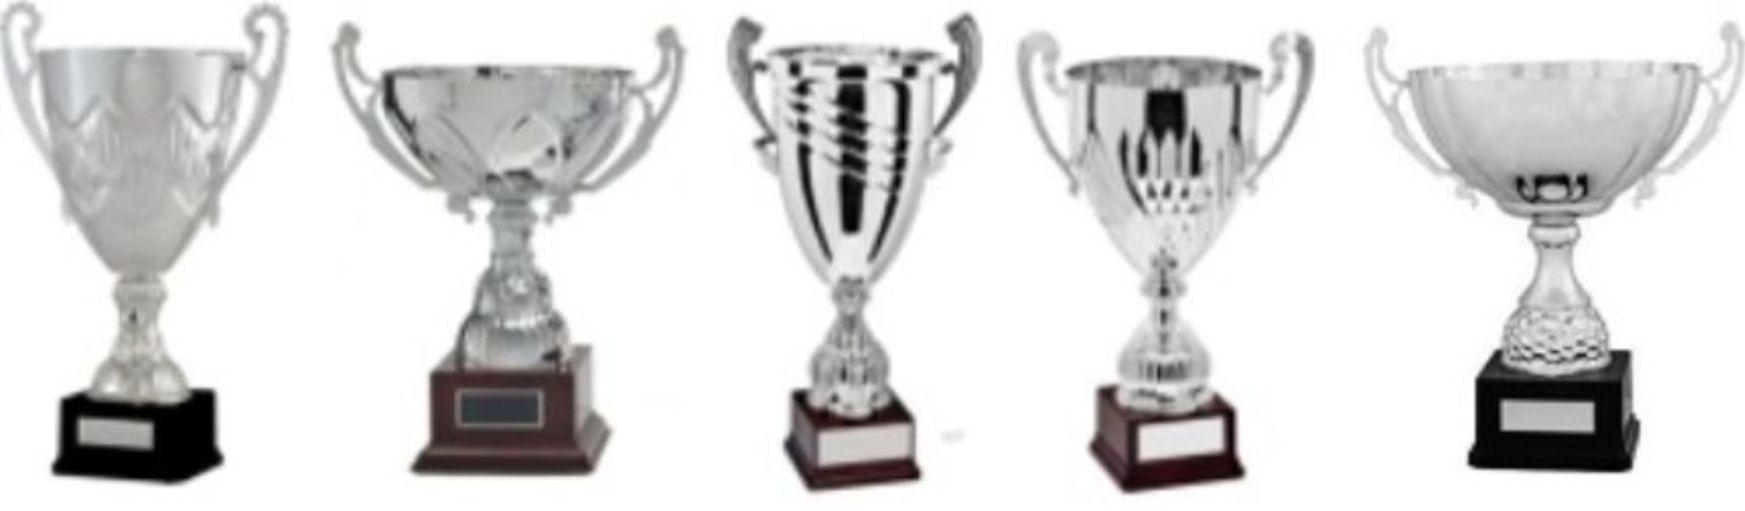 'Turin' Silver Cup Trophy Value Bargain Award *Free Personalised Label* 4 SIZES 